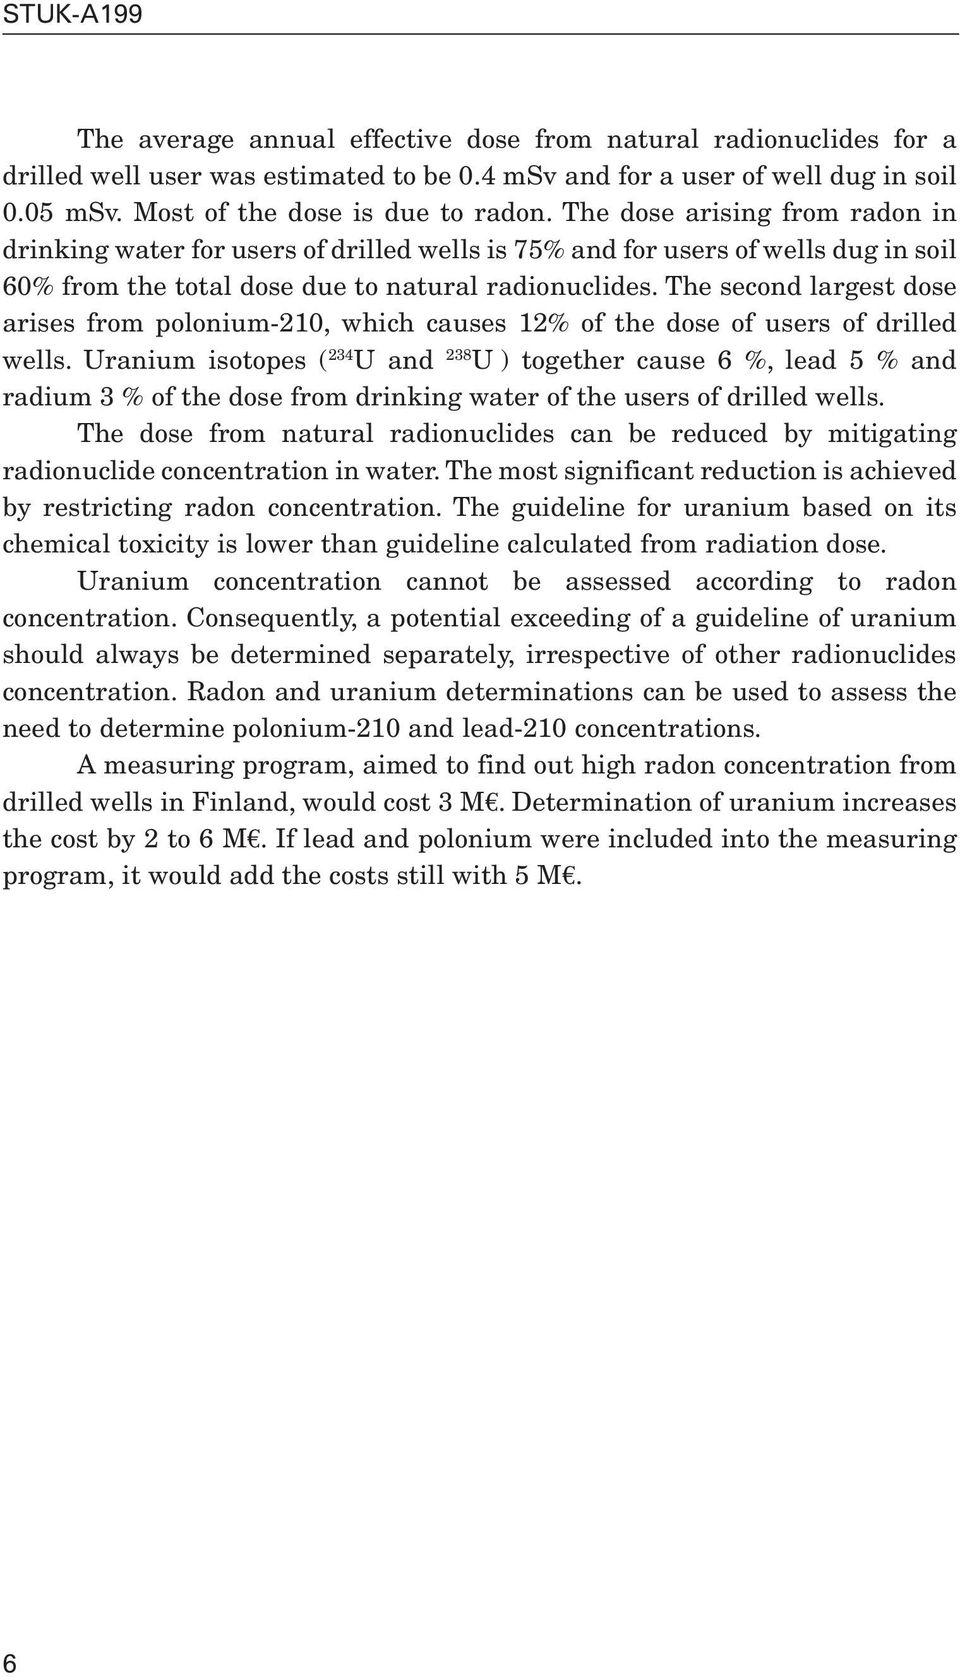 The second largest dose arises from polonium-210, which causes 12% of the dose of users of drilled wells.